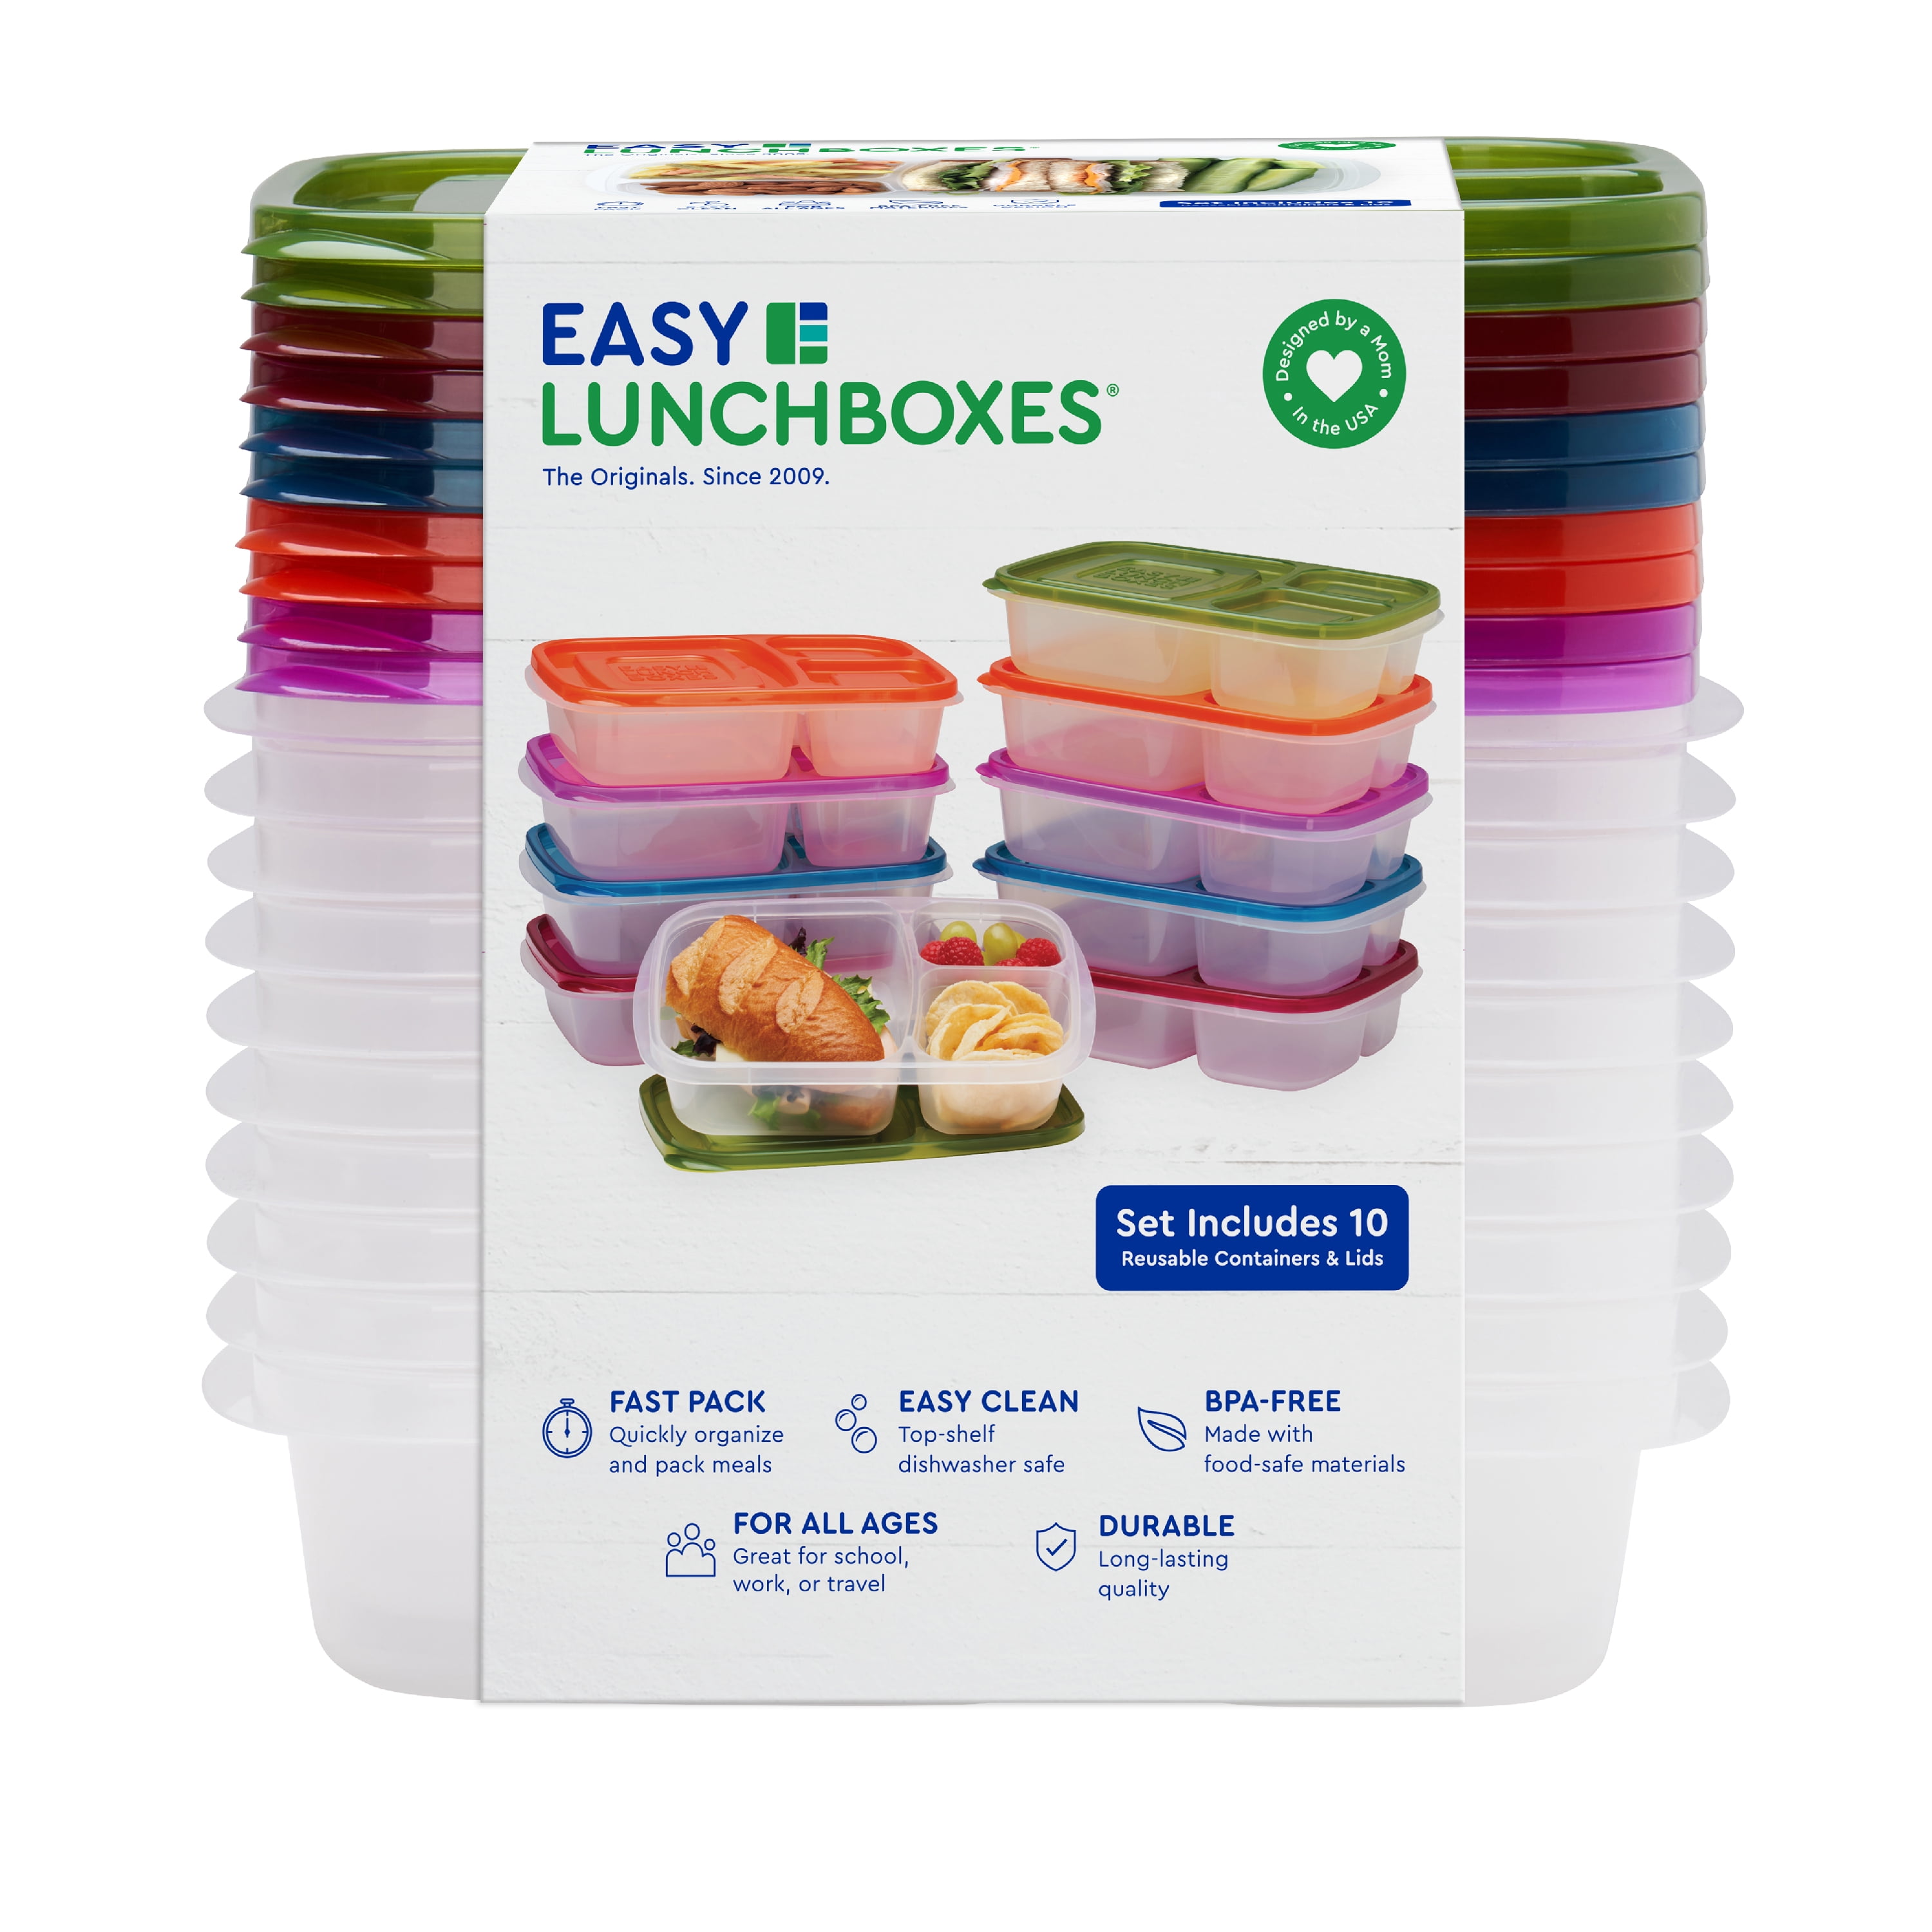 Colorful Silicone Bento Box - 3 Compartment – Bling Your Lunch